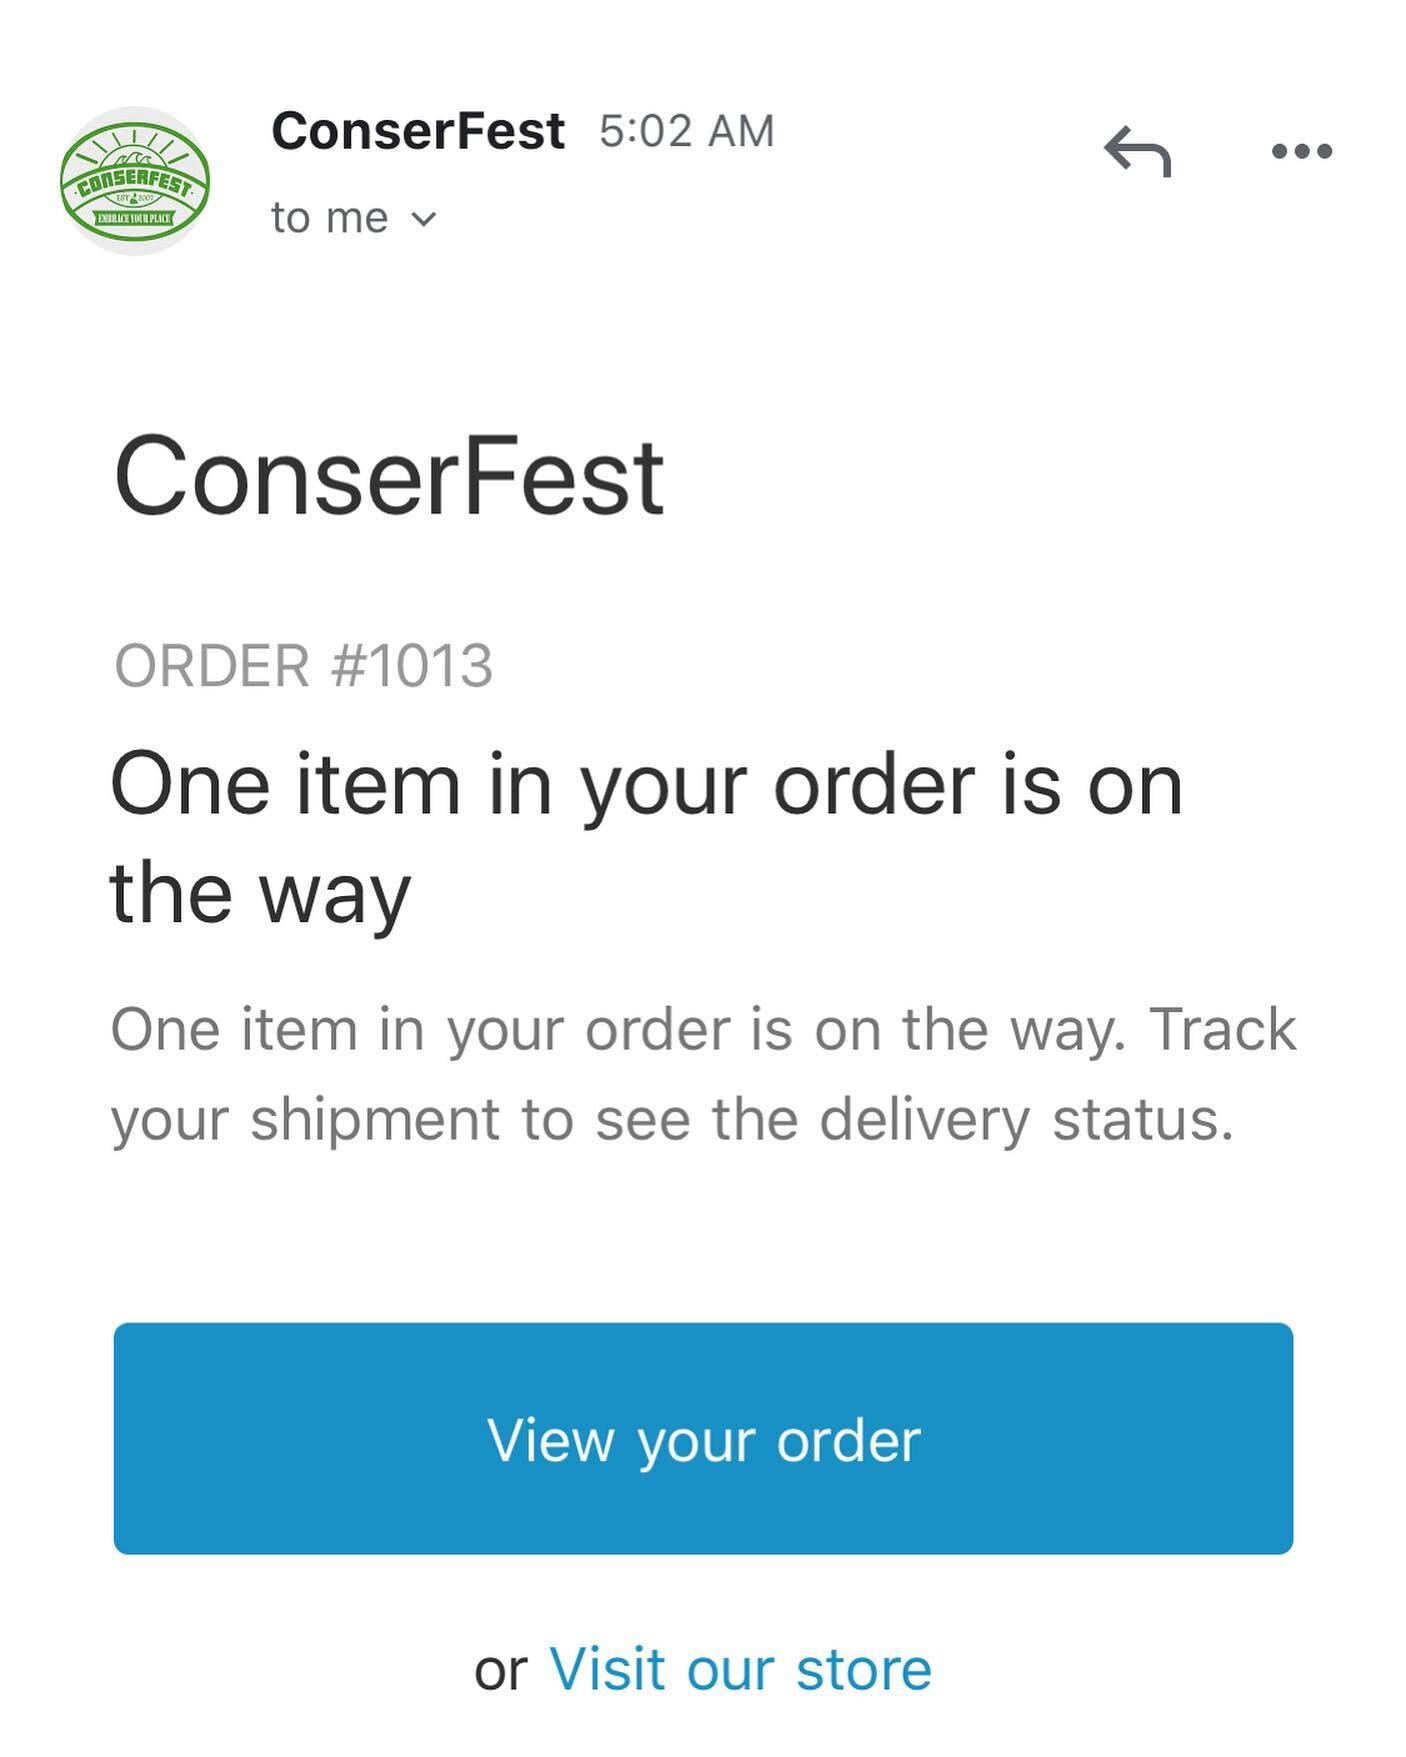 Can&rsquo;t wait to get my Conserfest 2020 merch! Go visit our website to get yours 😊 #musiconamission #embraceyourplace #conserfest2020